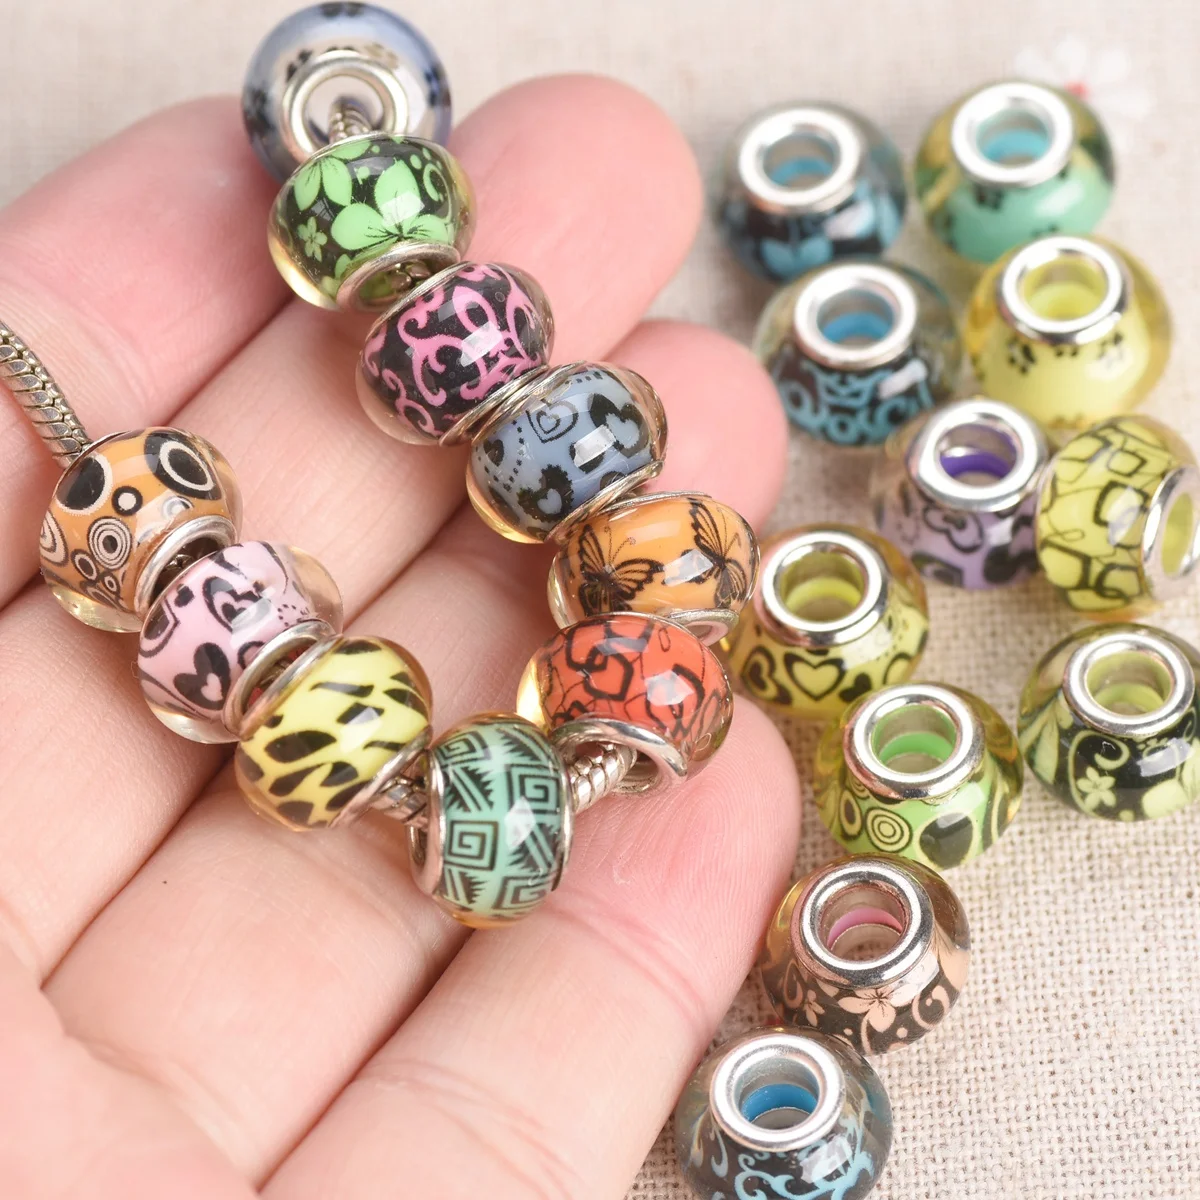 10pcs Random Mixed 13.5x9mm Round Resin Big Hole Beads for Jewelry